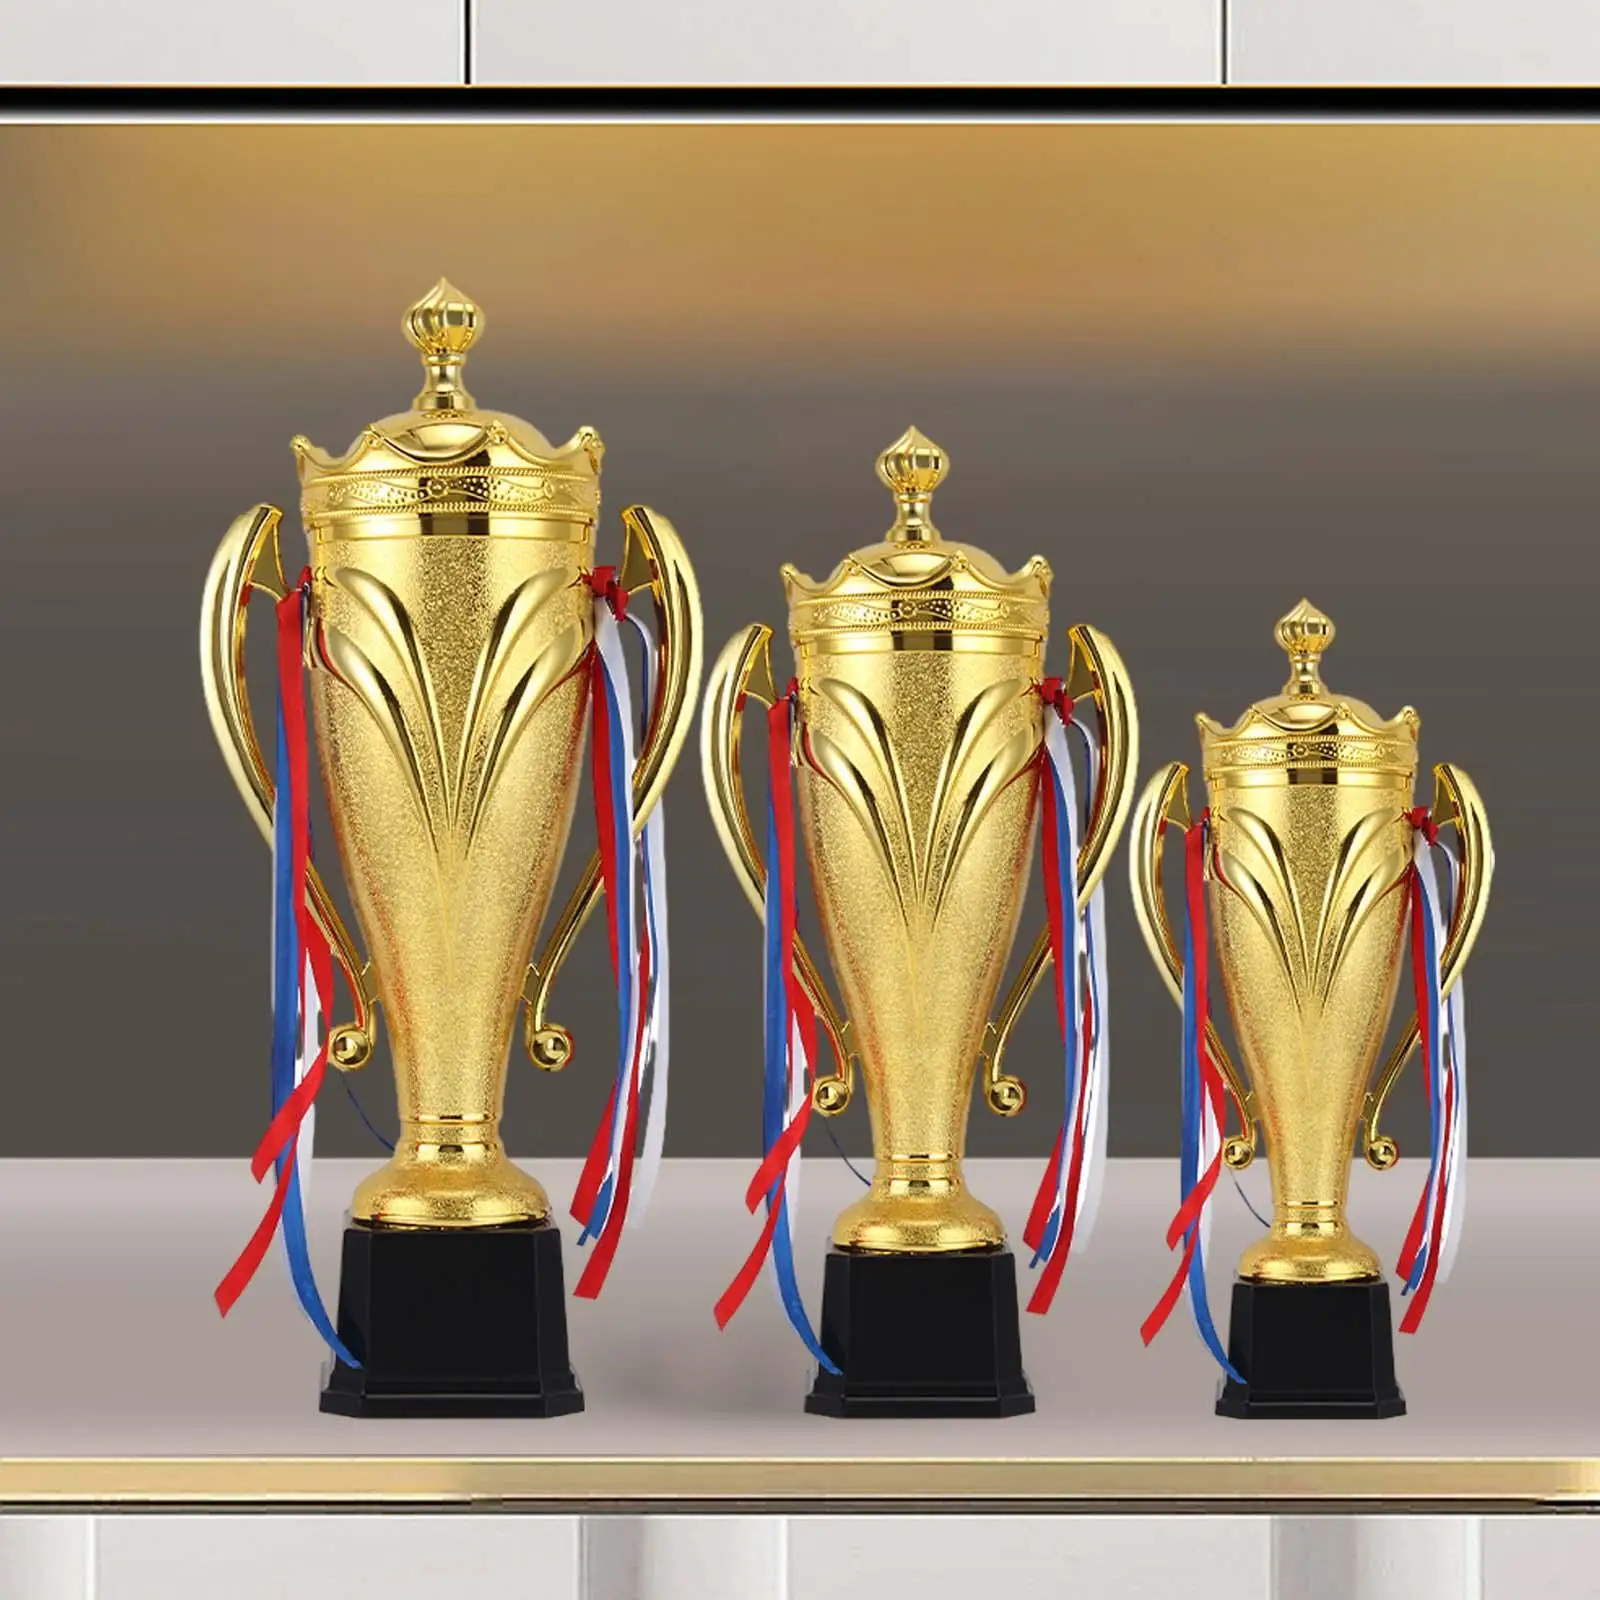 PP Material Winner Award Trophies Cup Gold Color Multipurpose Party Favors Props Lightweight for Sport Tournaments Games